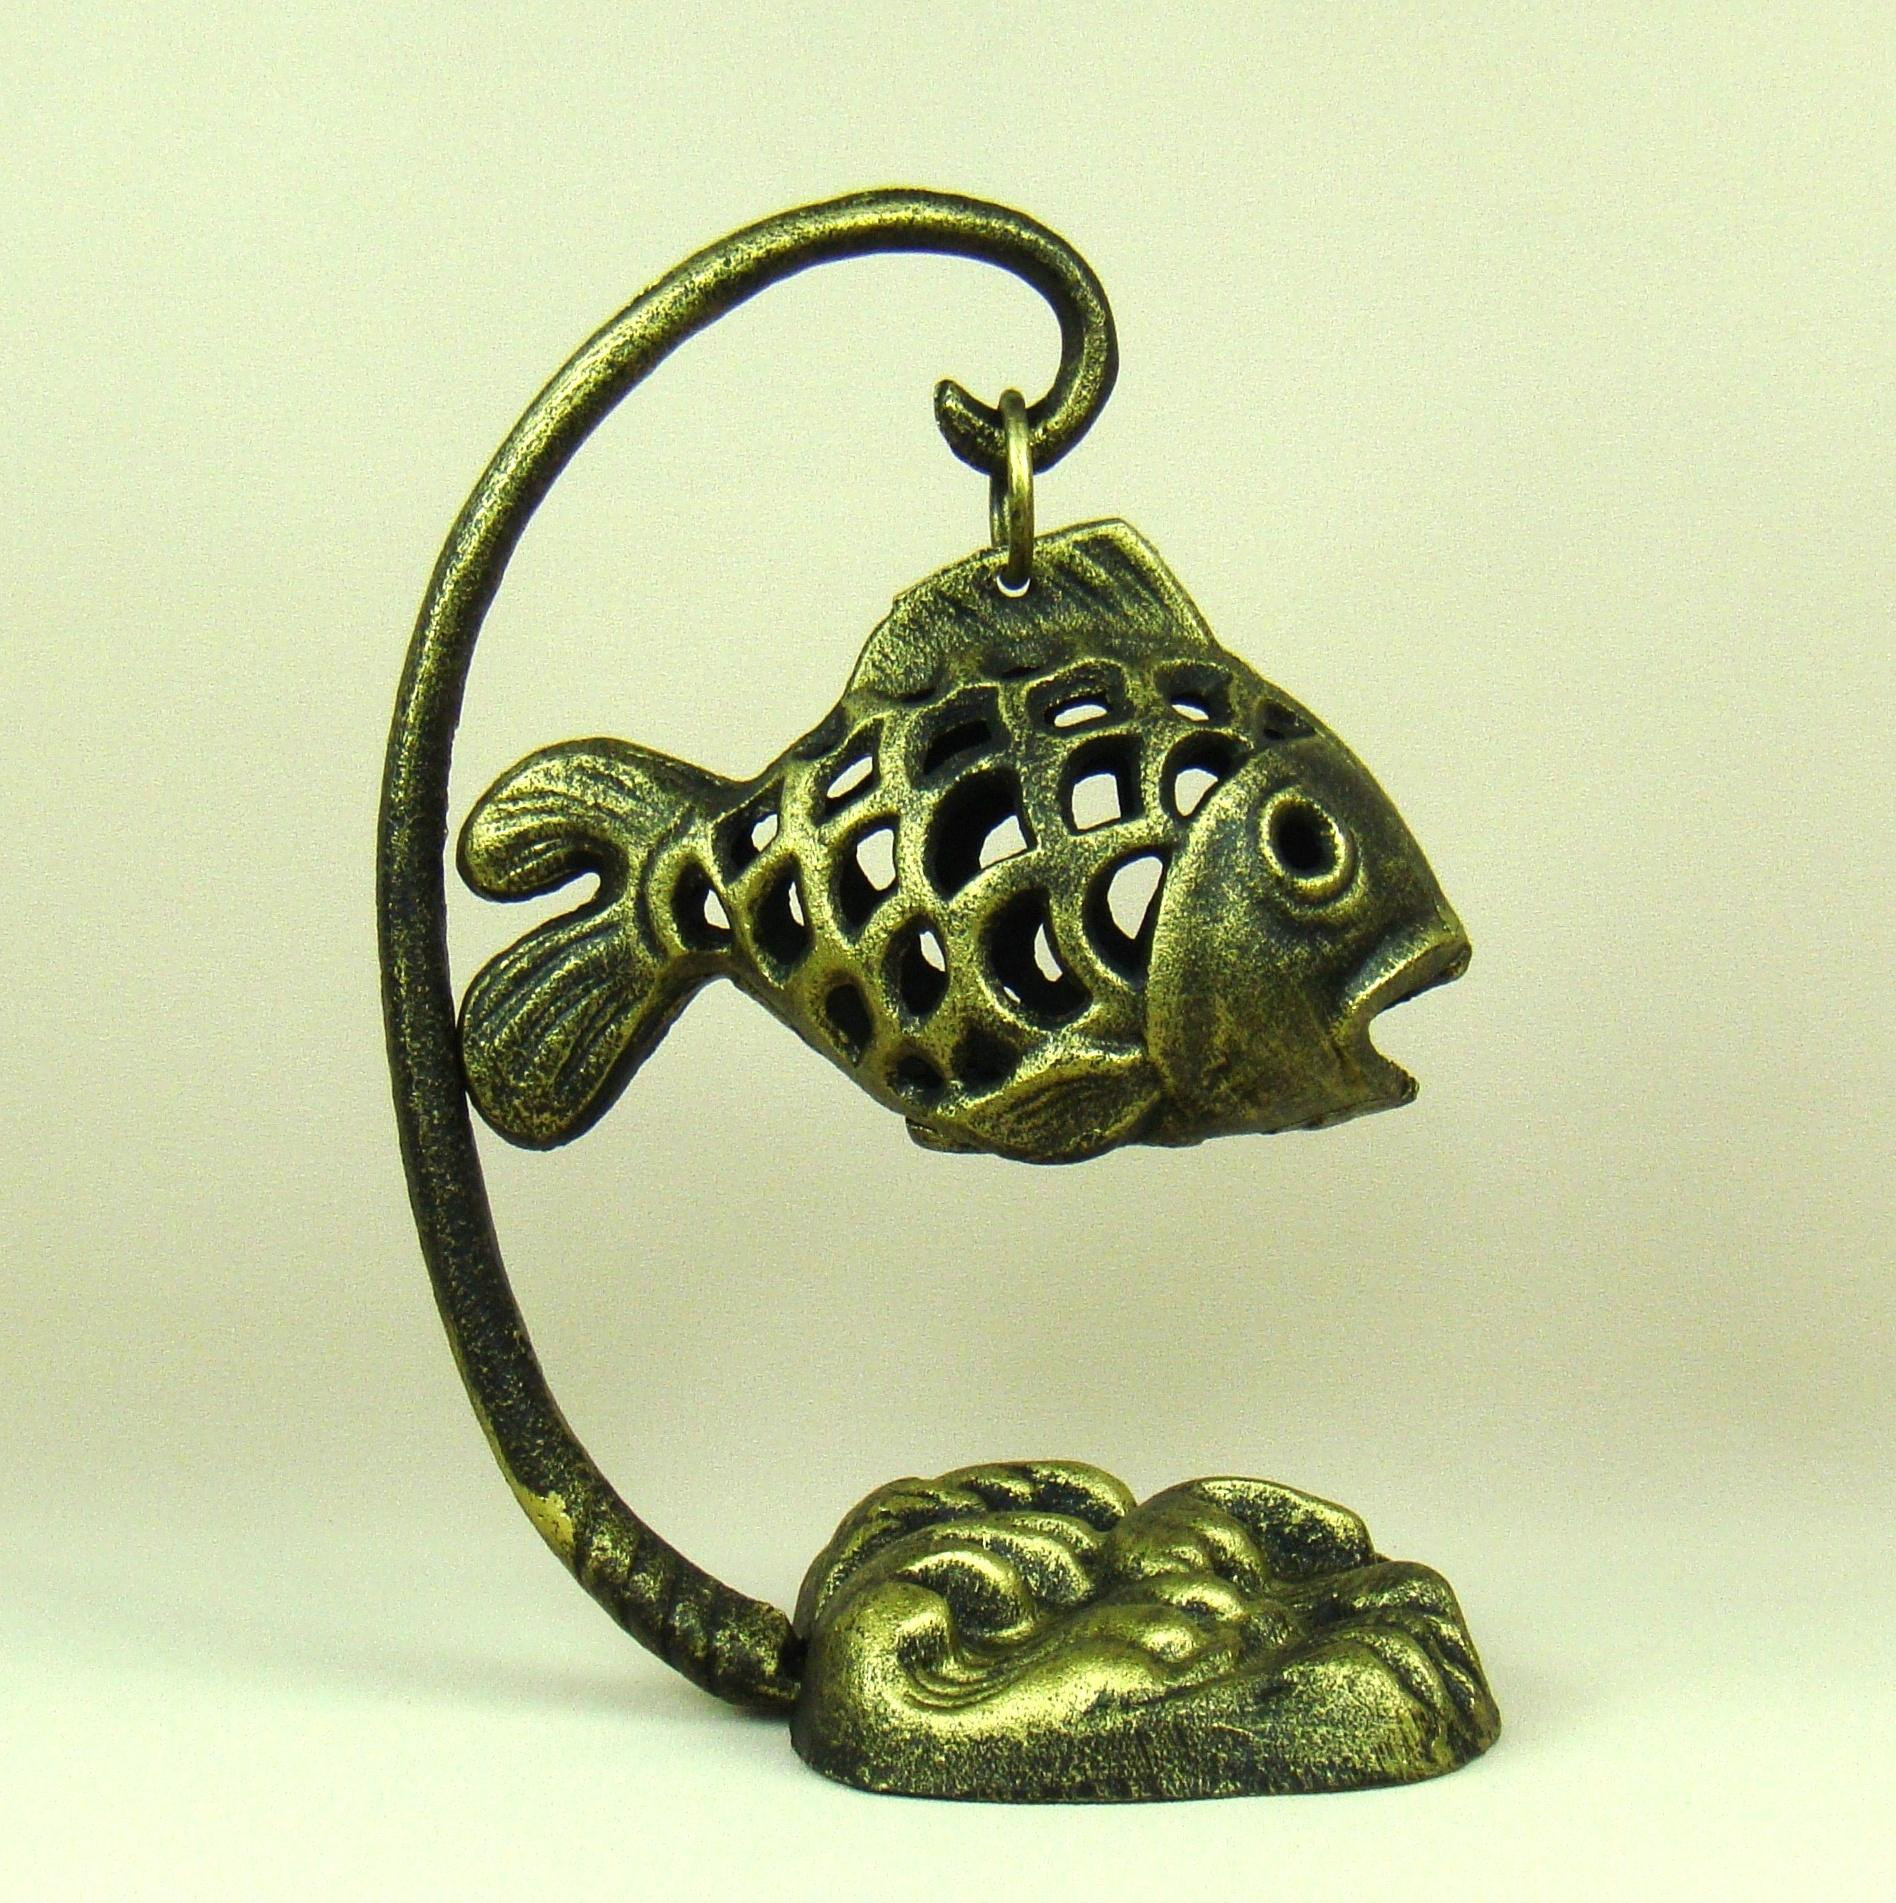 25 Awesome Pedestal Stands for Vases 2022 free download pedestal stands for vases of candle stands wholesale superb creative cast iron fish candle holder with regard to candle stands wholesale superb creative cast iron fish candle holder hanging 